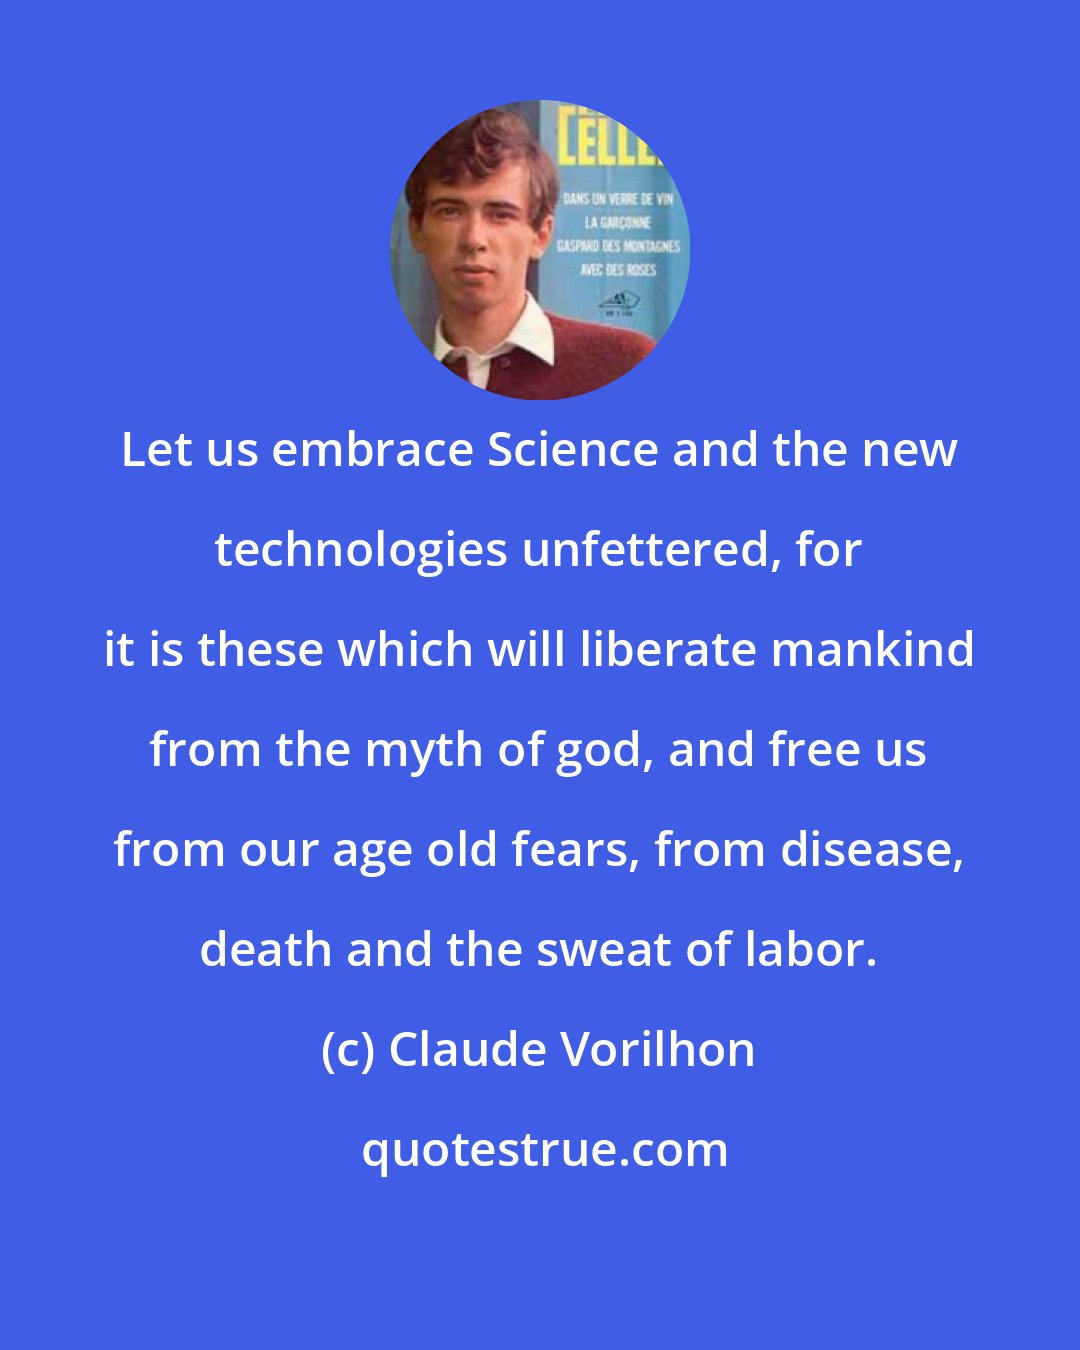 Claude Vorilhon: Let us embrace Science and the new technologies unfettered, for it is these which will liberate mankind from the myth of god, and free us from our age old fears, from disease, death and the sweat of labor.